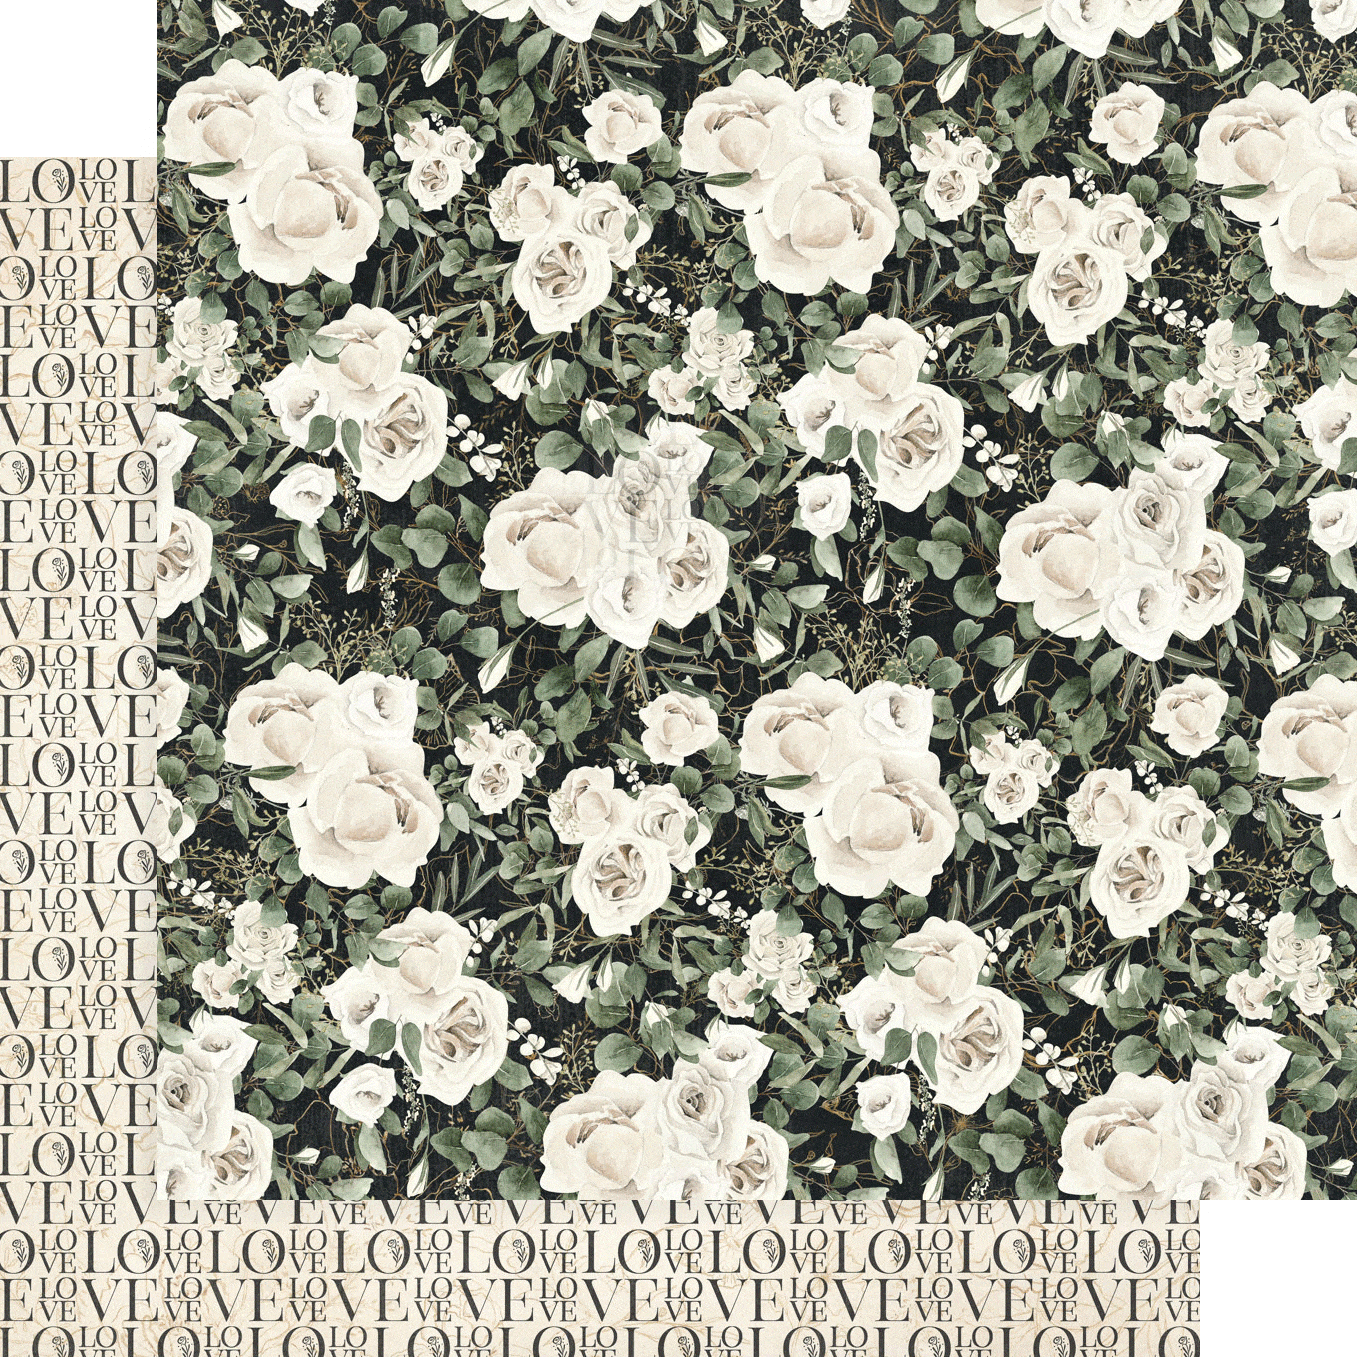 Black and White Scrapbook Paper - Graphics / Patterns